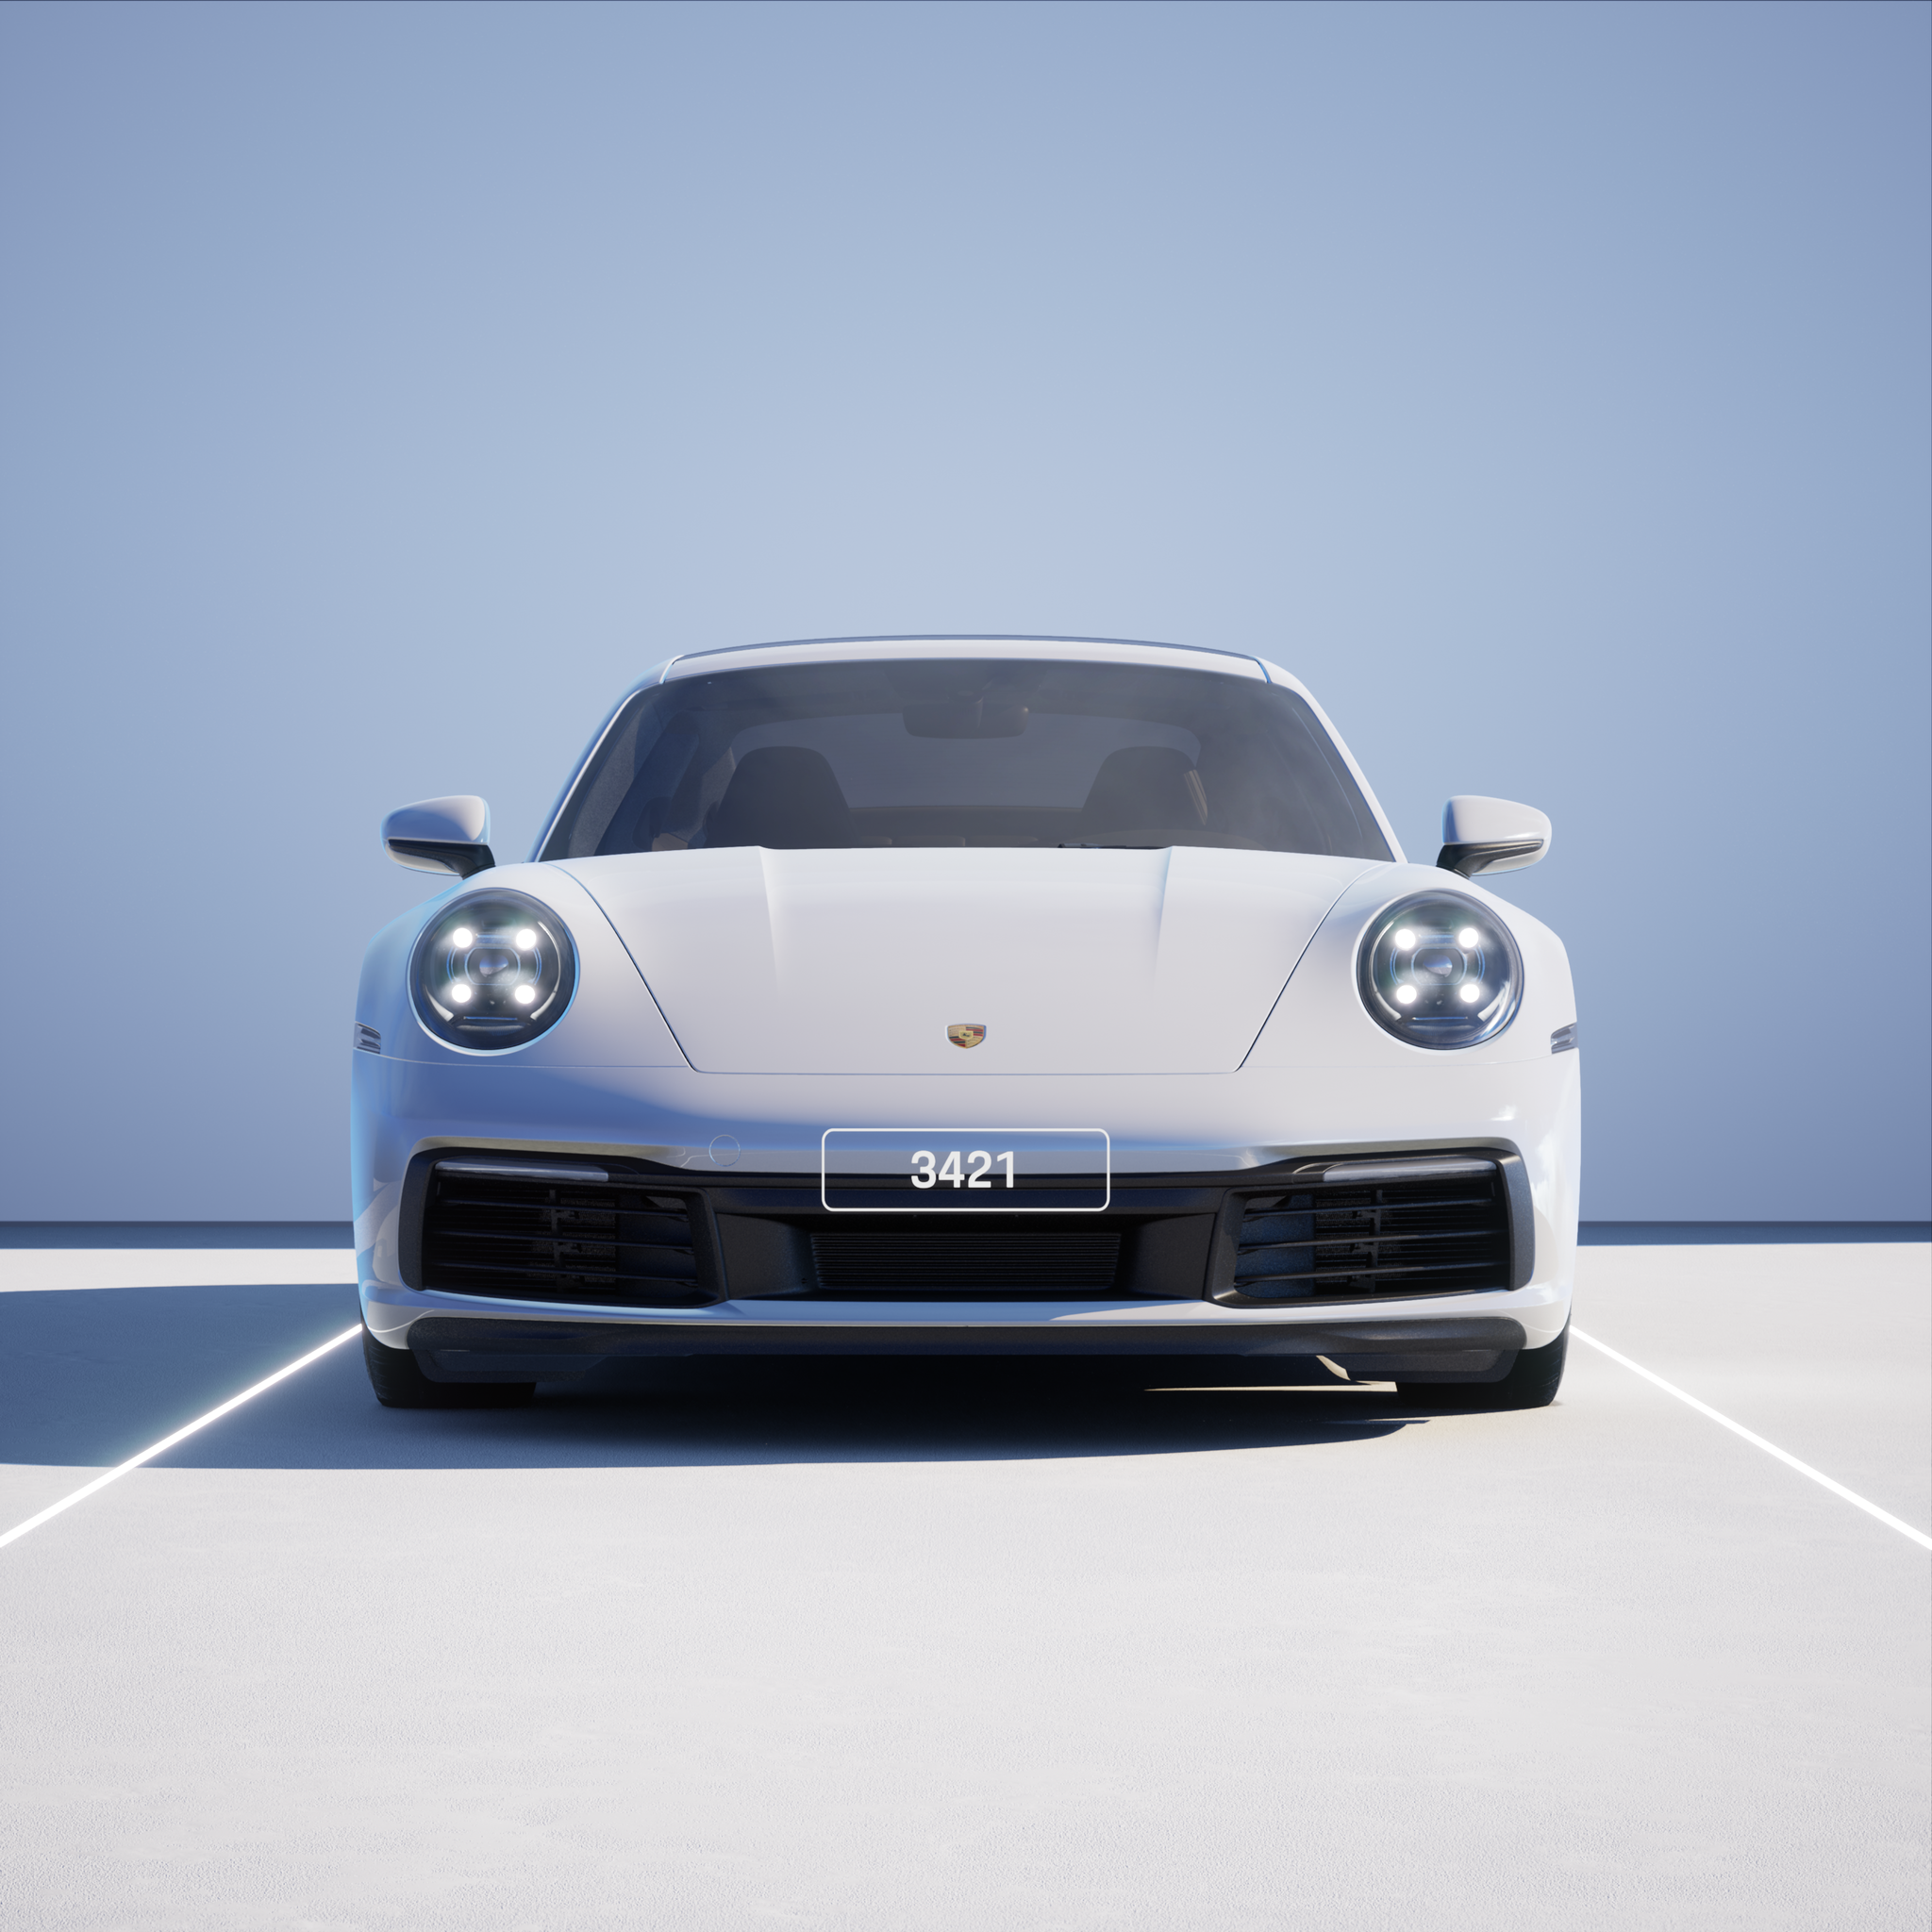 The PORSCHΞ 911 3421 image in phase